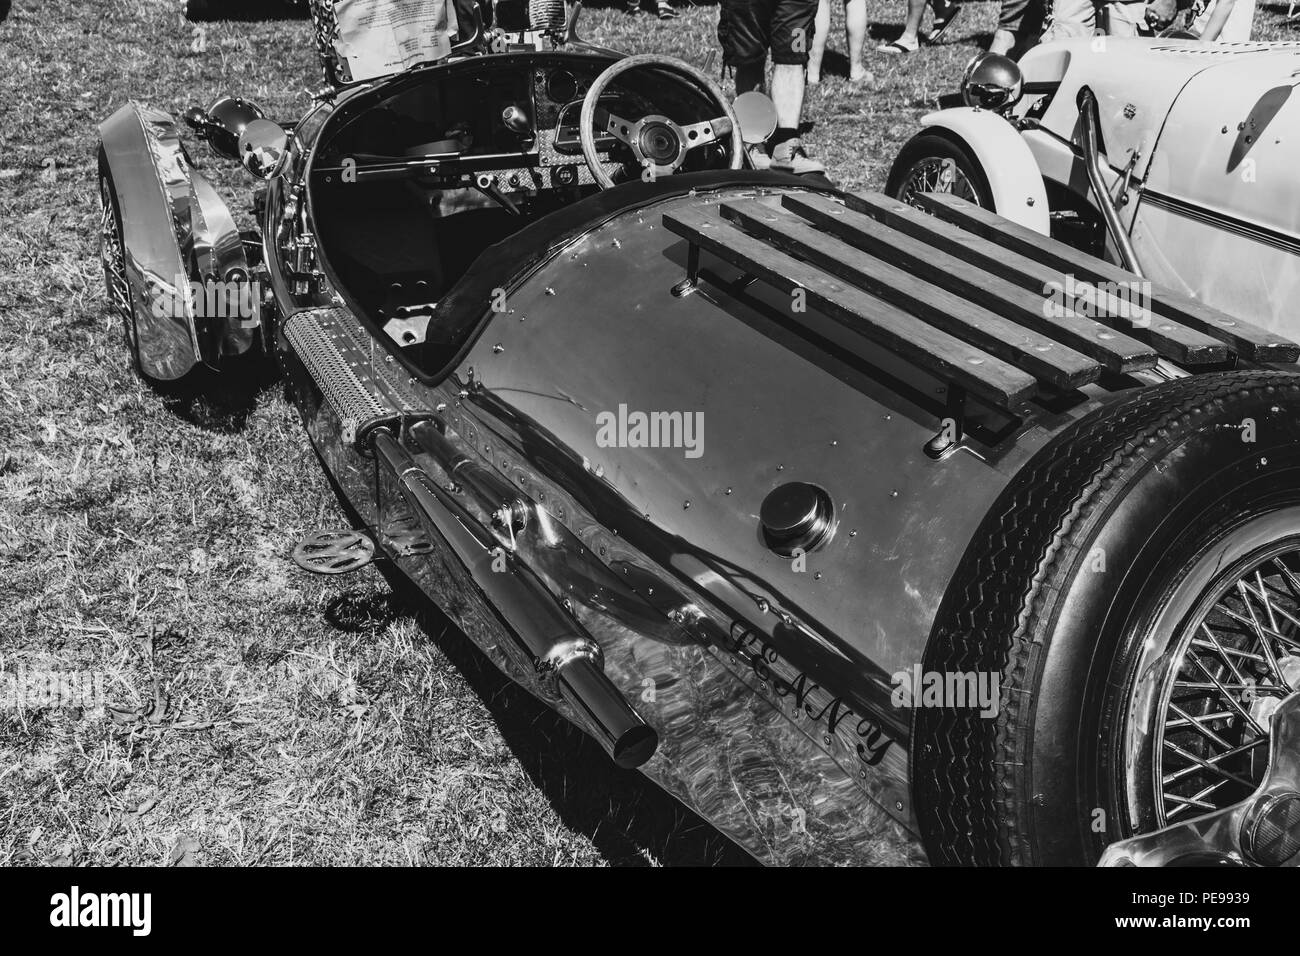 American car show Black and White Stock Photos & Images - Alamy